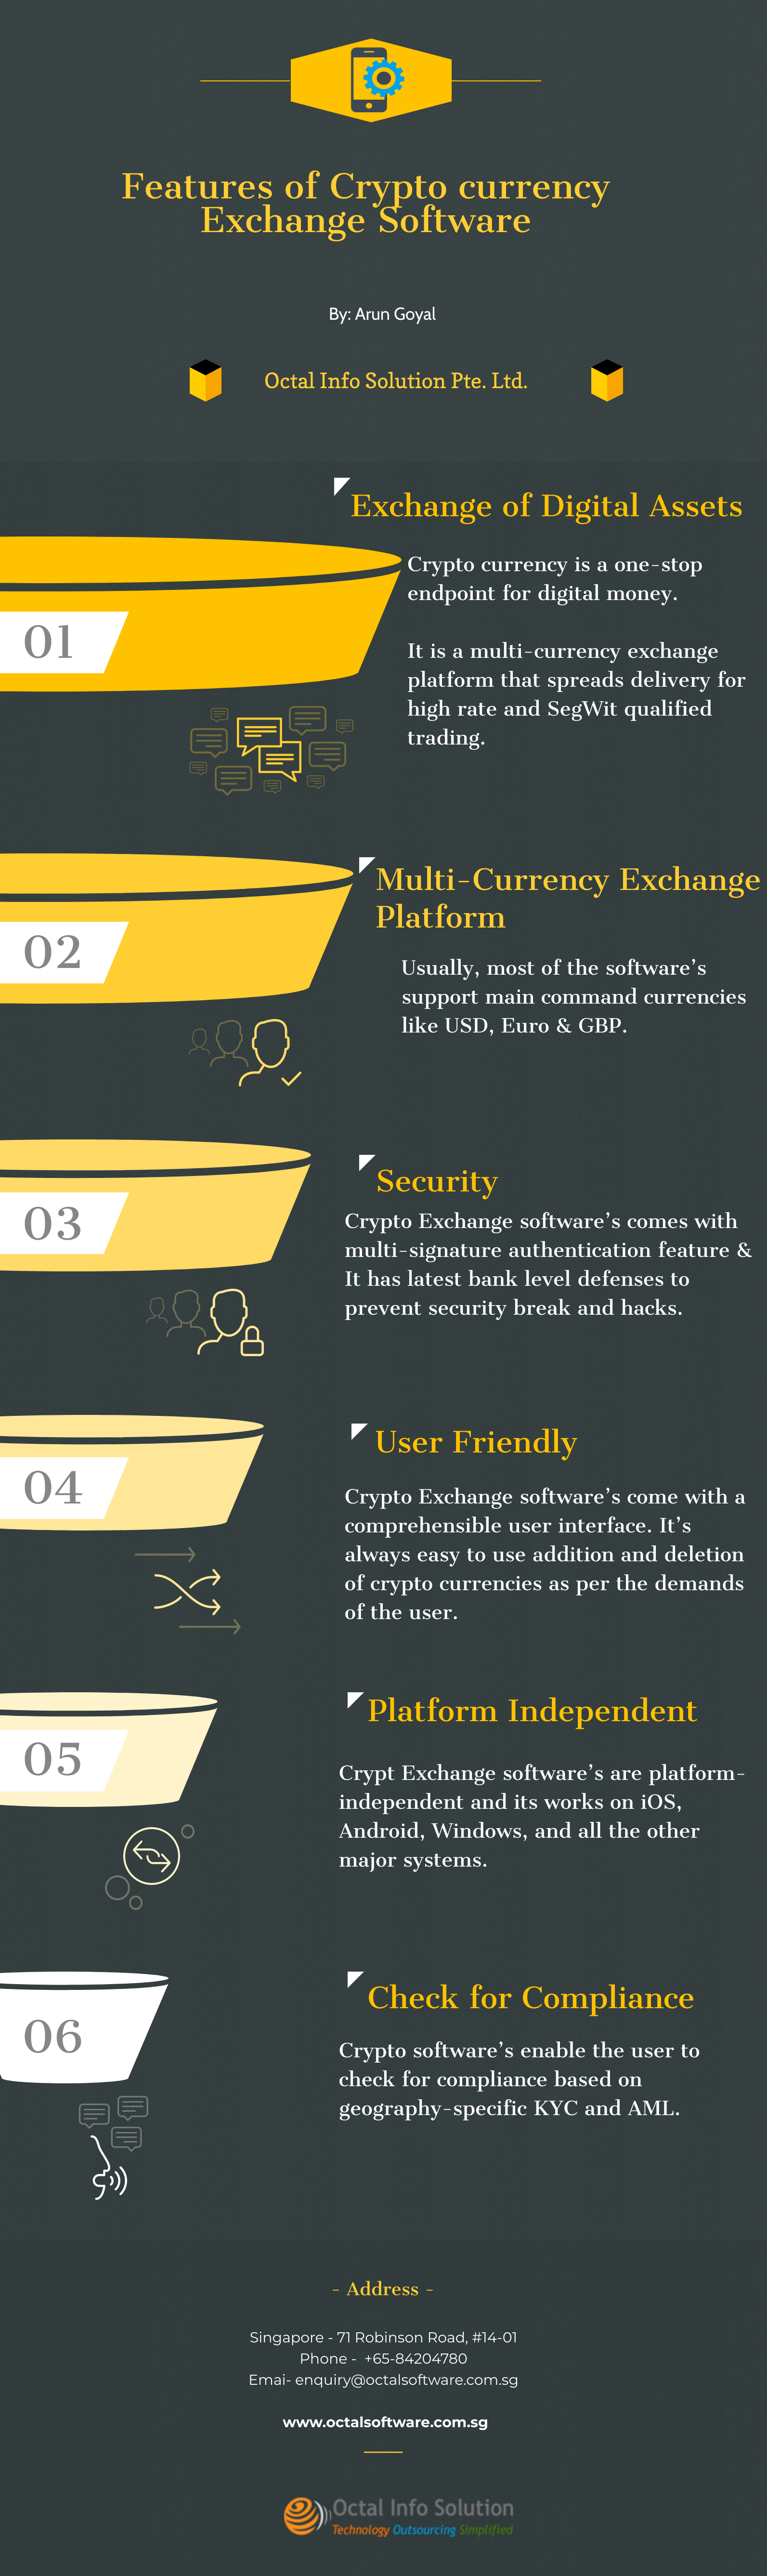 Features and Benefits of the Bitcoin and Cryptocurrency exchange Software